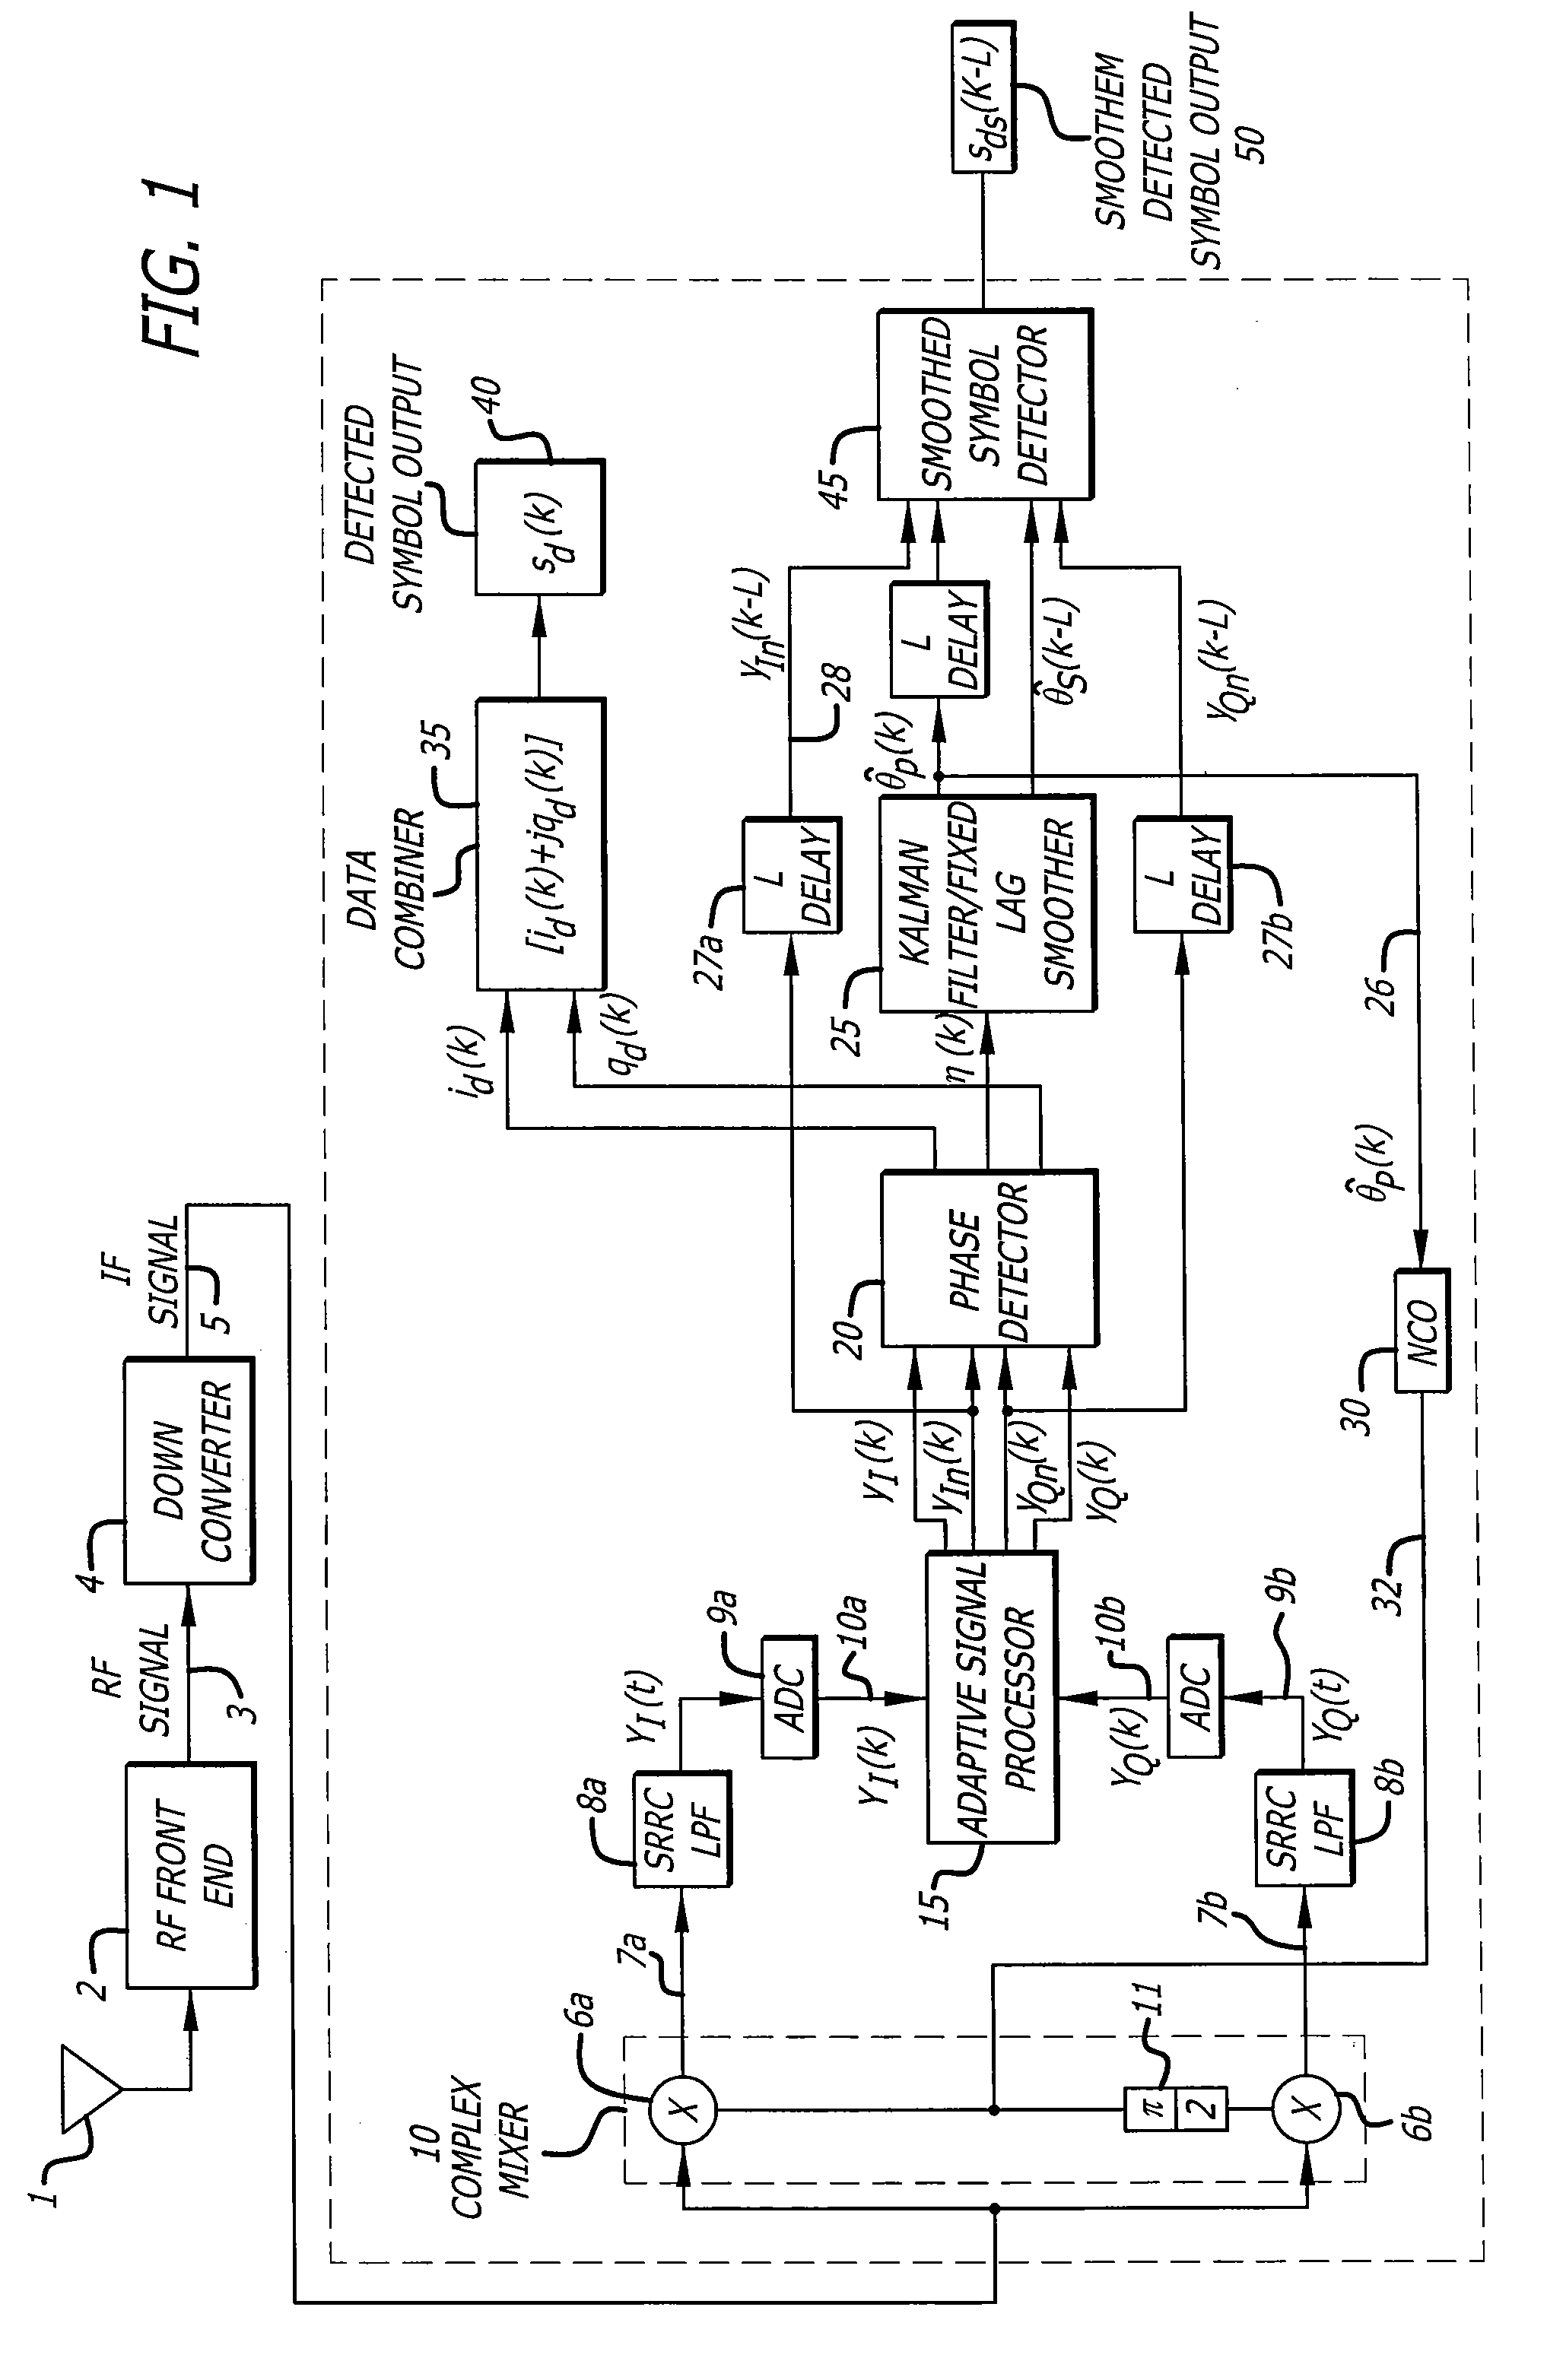 Adaptive receiver for high-order modulated signals over fading channels